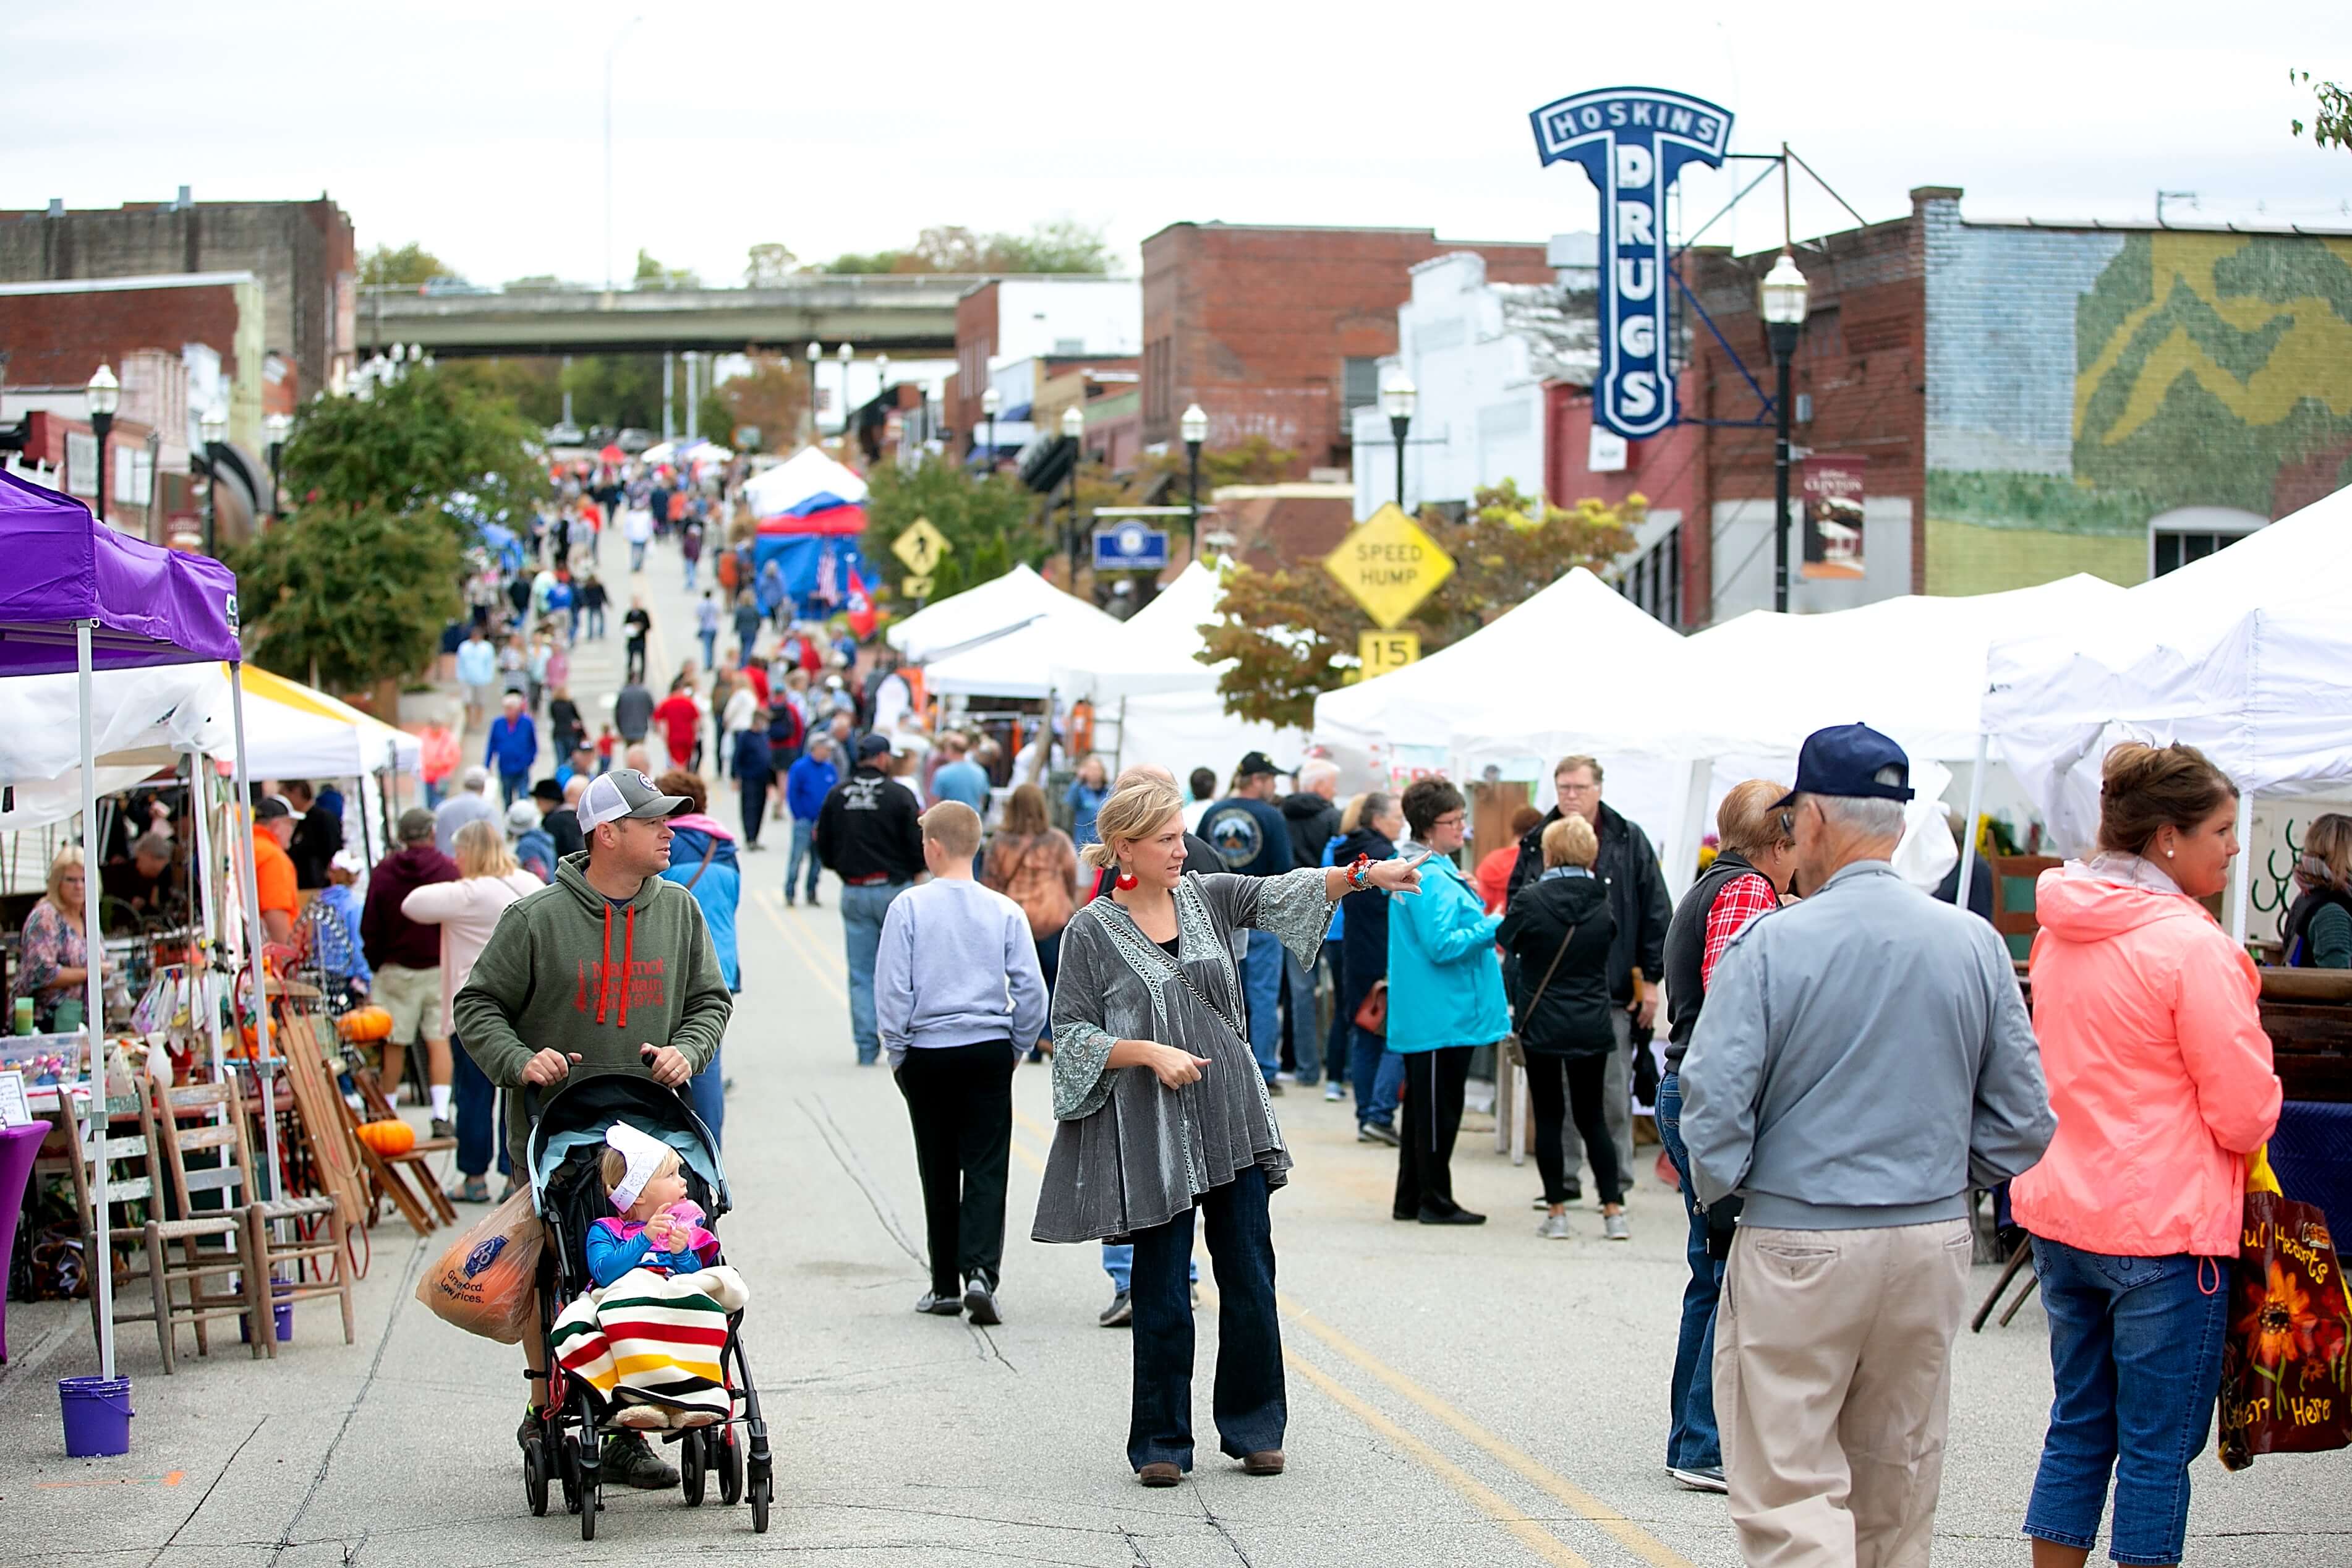 Pictures of the 19th Annual Clinch River Fall Antique Festival